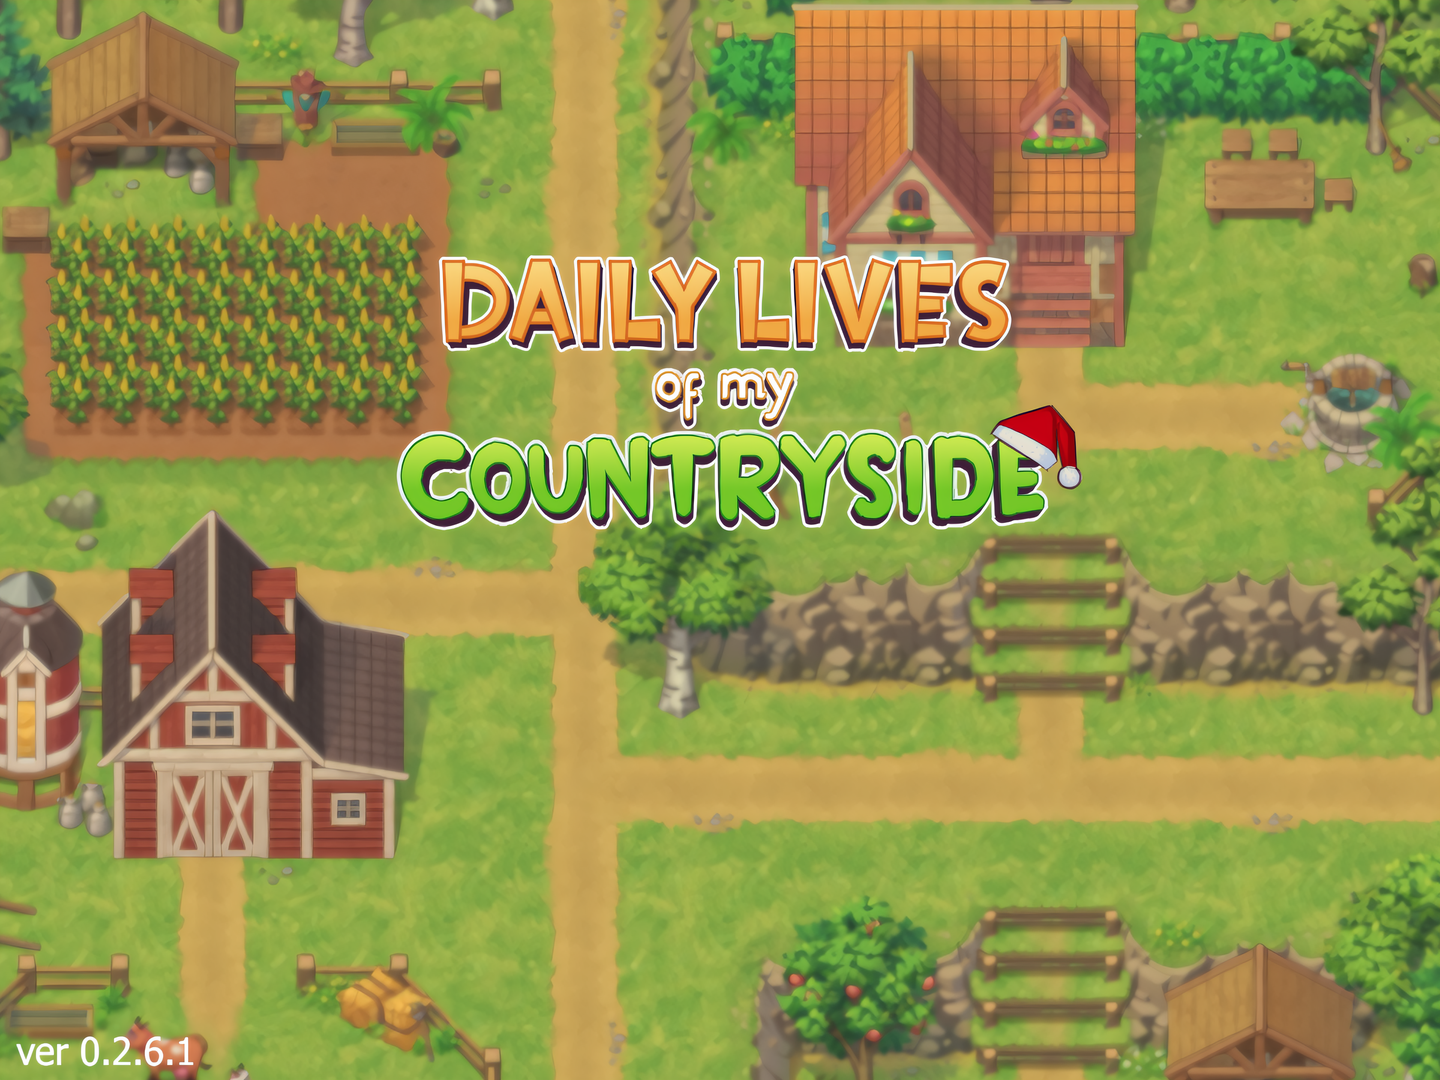 A day in the country 2. Daily Lives of my countryside игра. Daily Lives of my countryside русская версия. Daily Lives of my countryside последняя версия. Daily Lives of my Country Side.